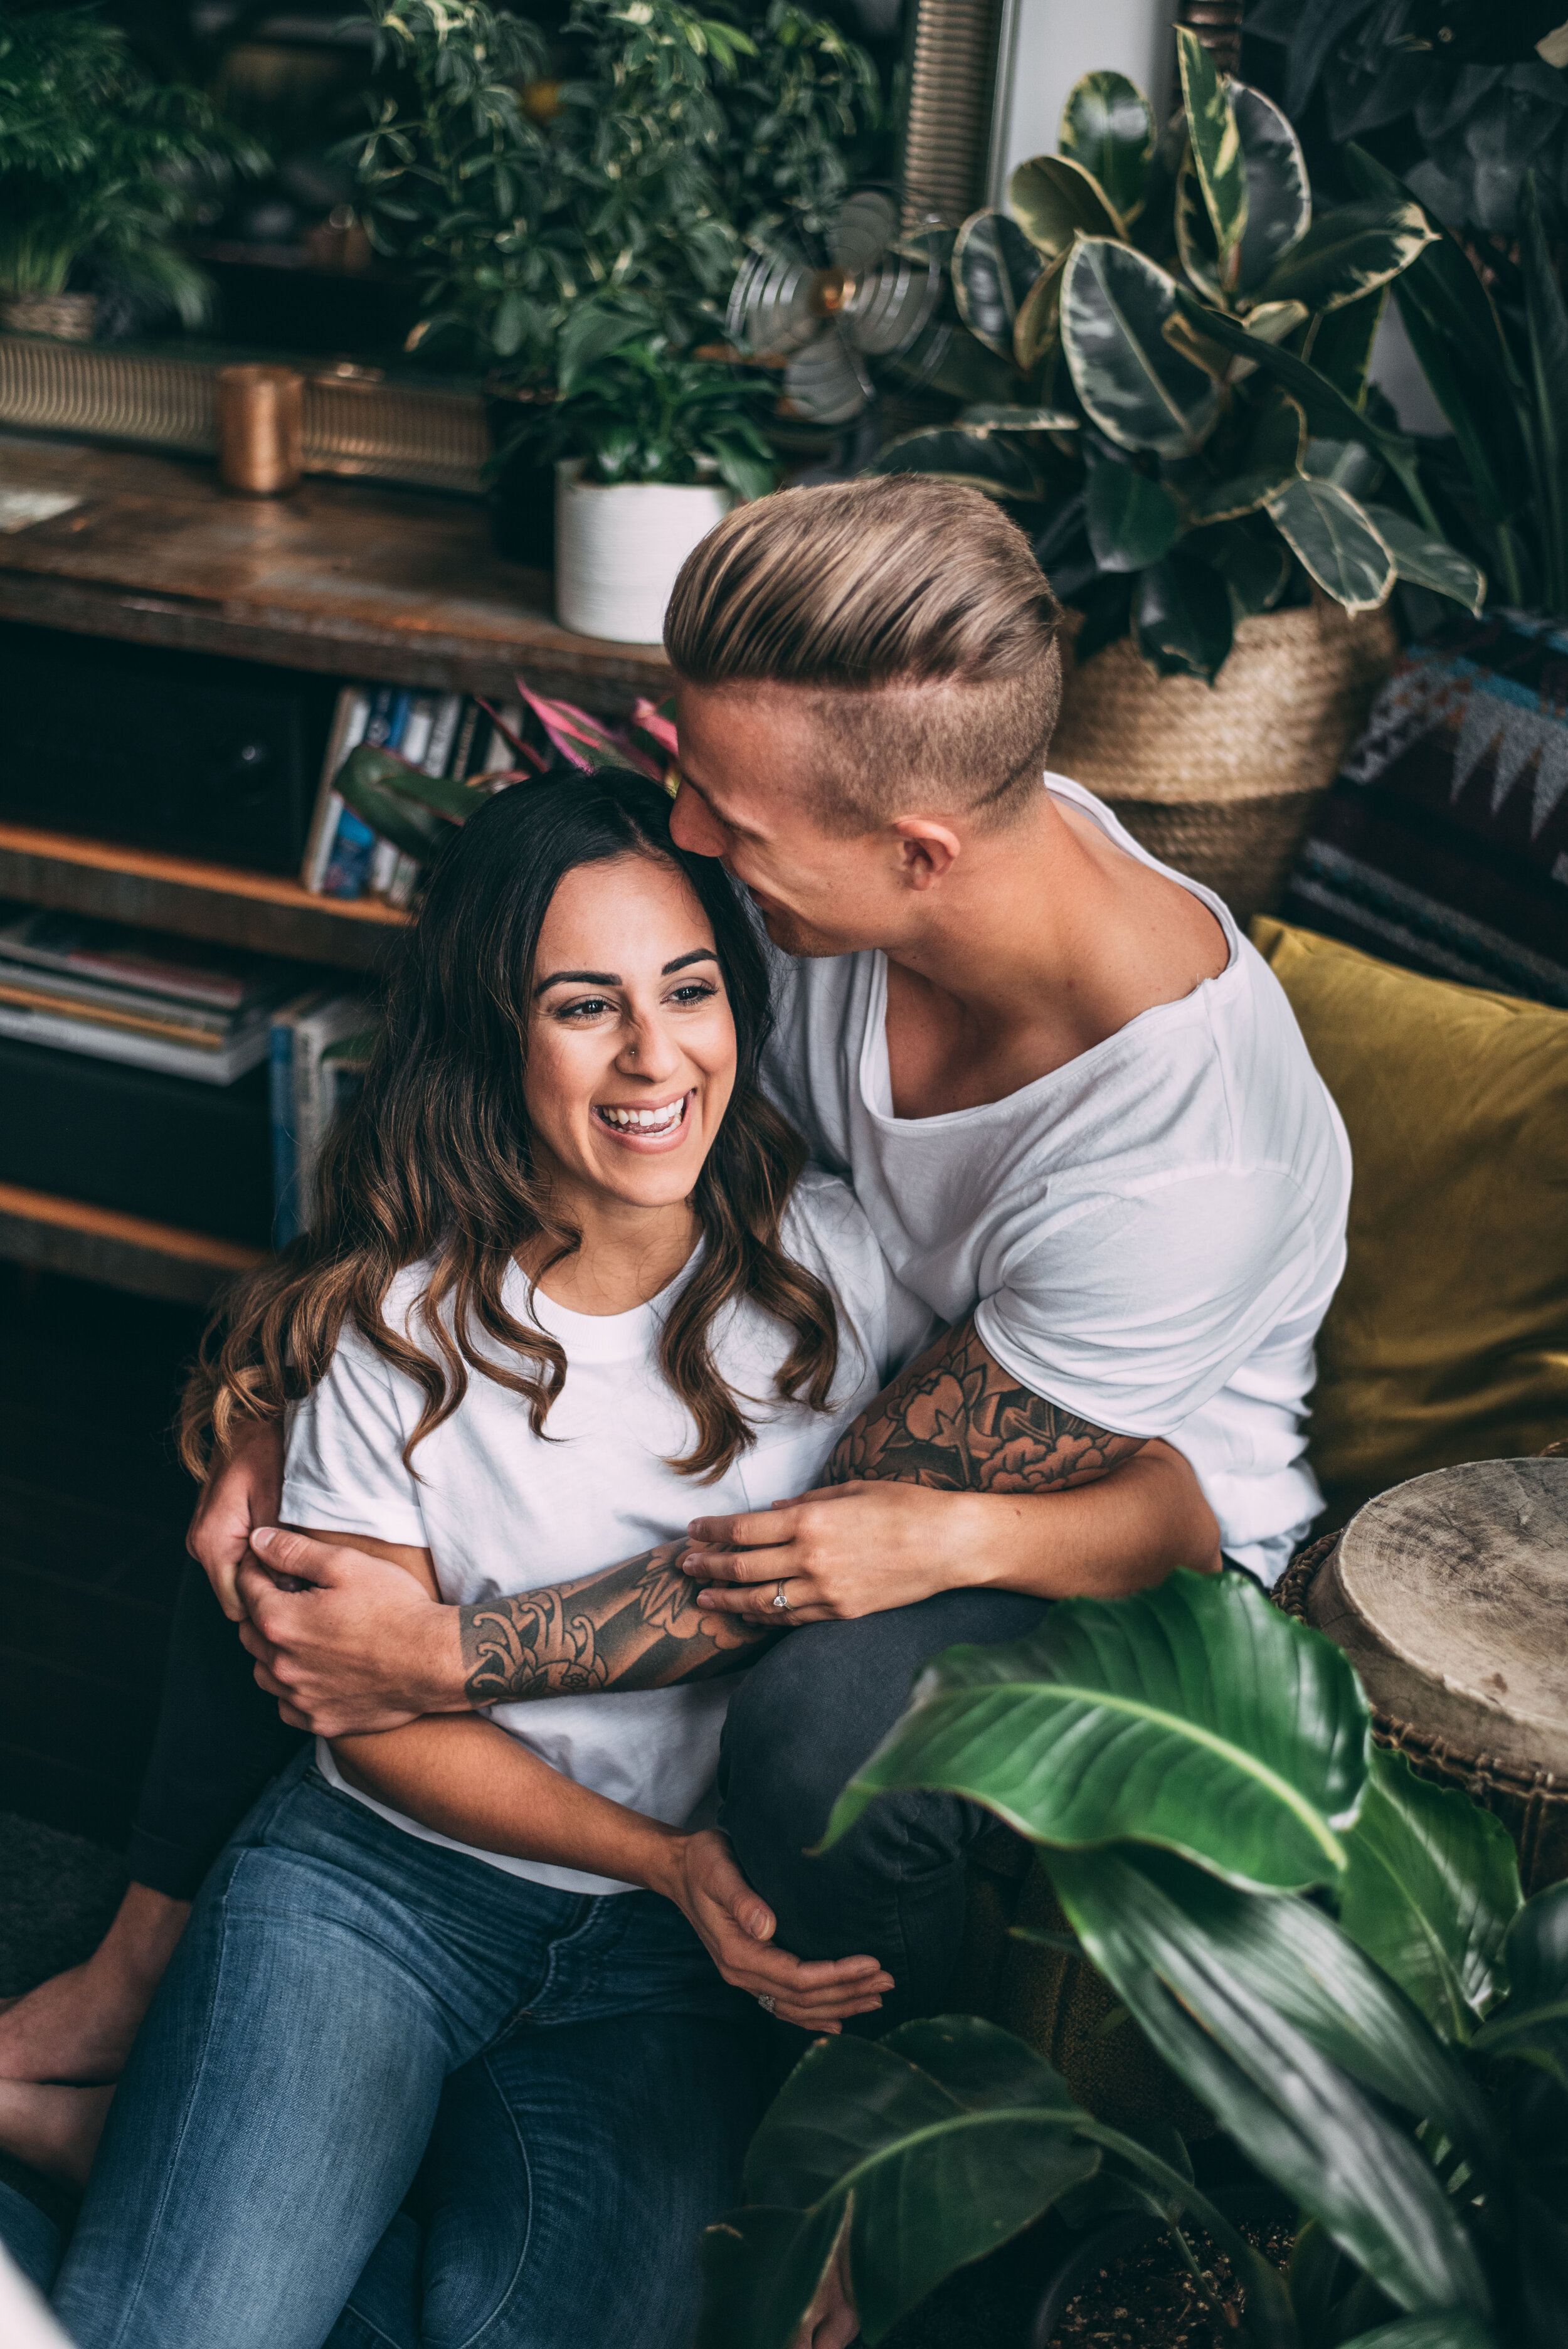 Vancouver Engagement Session - In Home Couples Session - Loft Garden Oasis - Laura Olson Photography - Sunshine Coast BC & Vancouver Wedding & Elopement Photographer3673.jpg